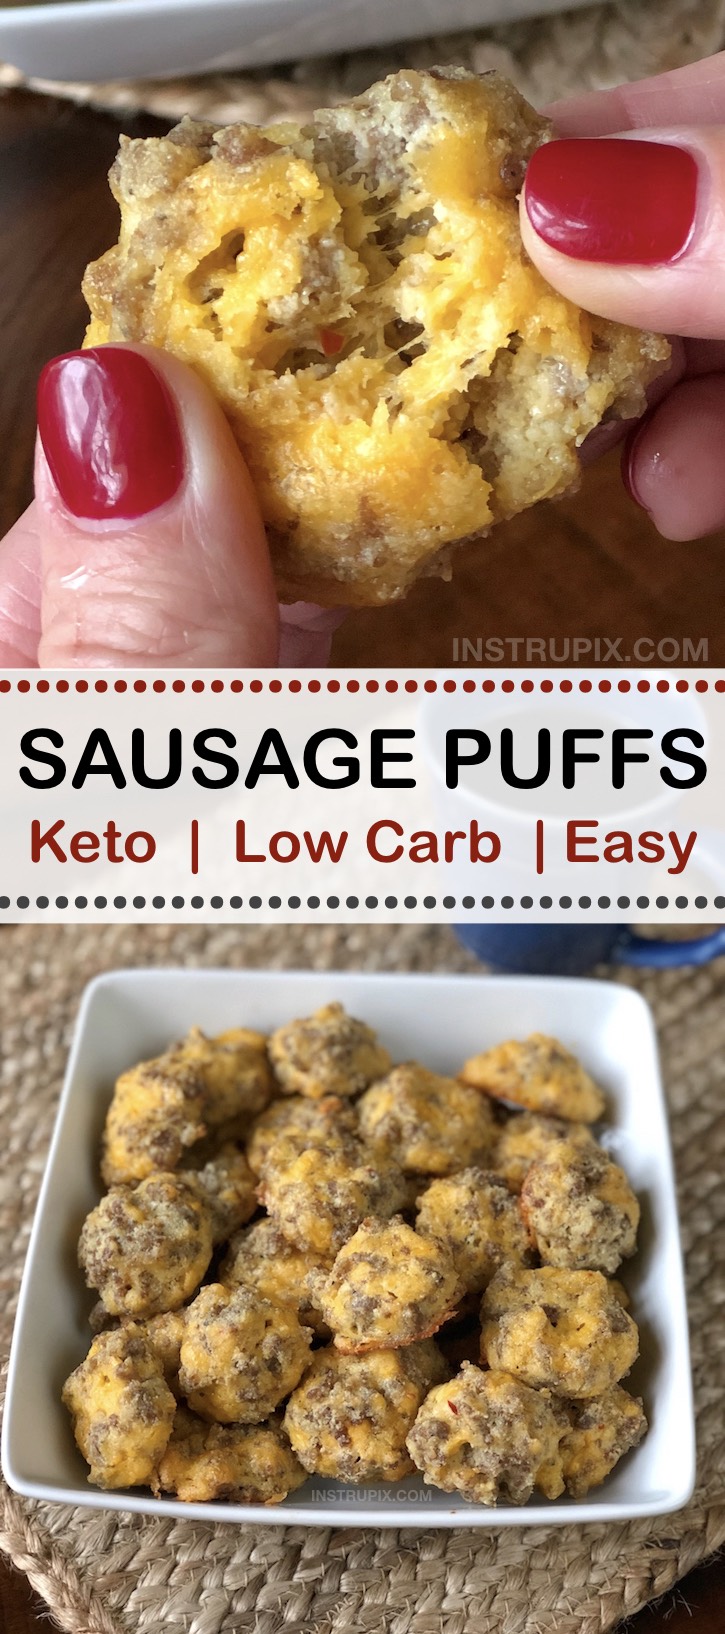 Easy low carb keto snack or breakfast idea! Cheesy Sausage Puffs | Instrupix.com